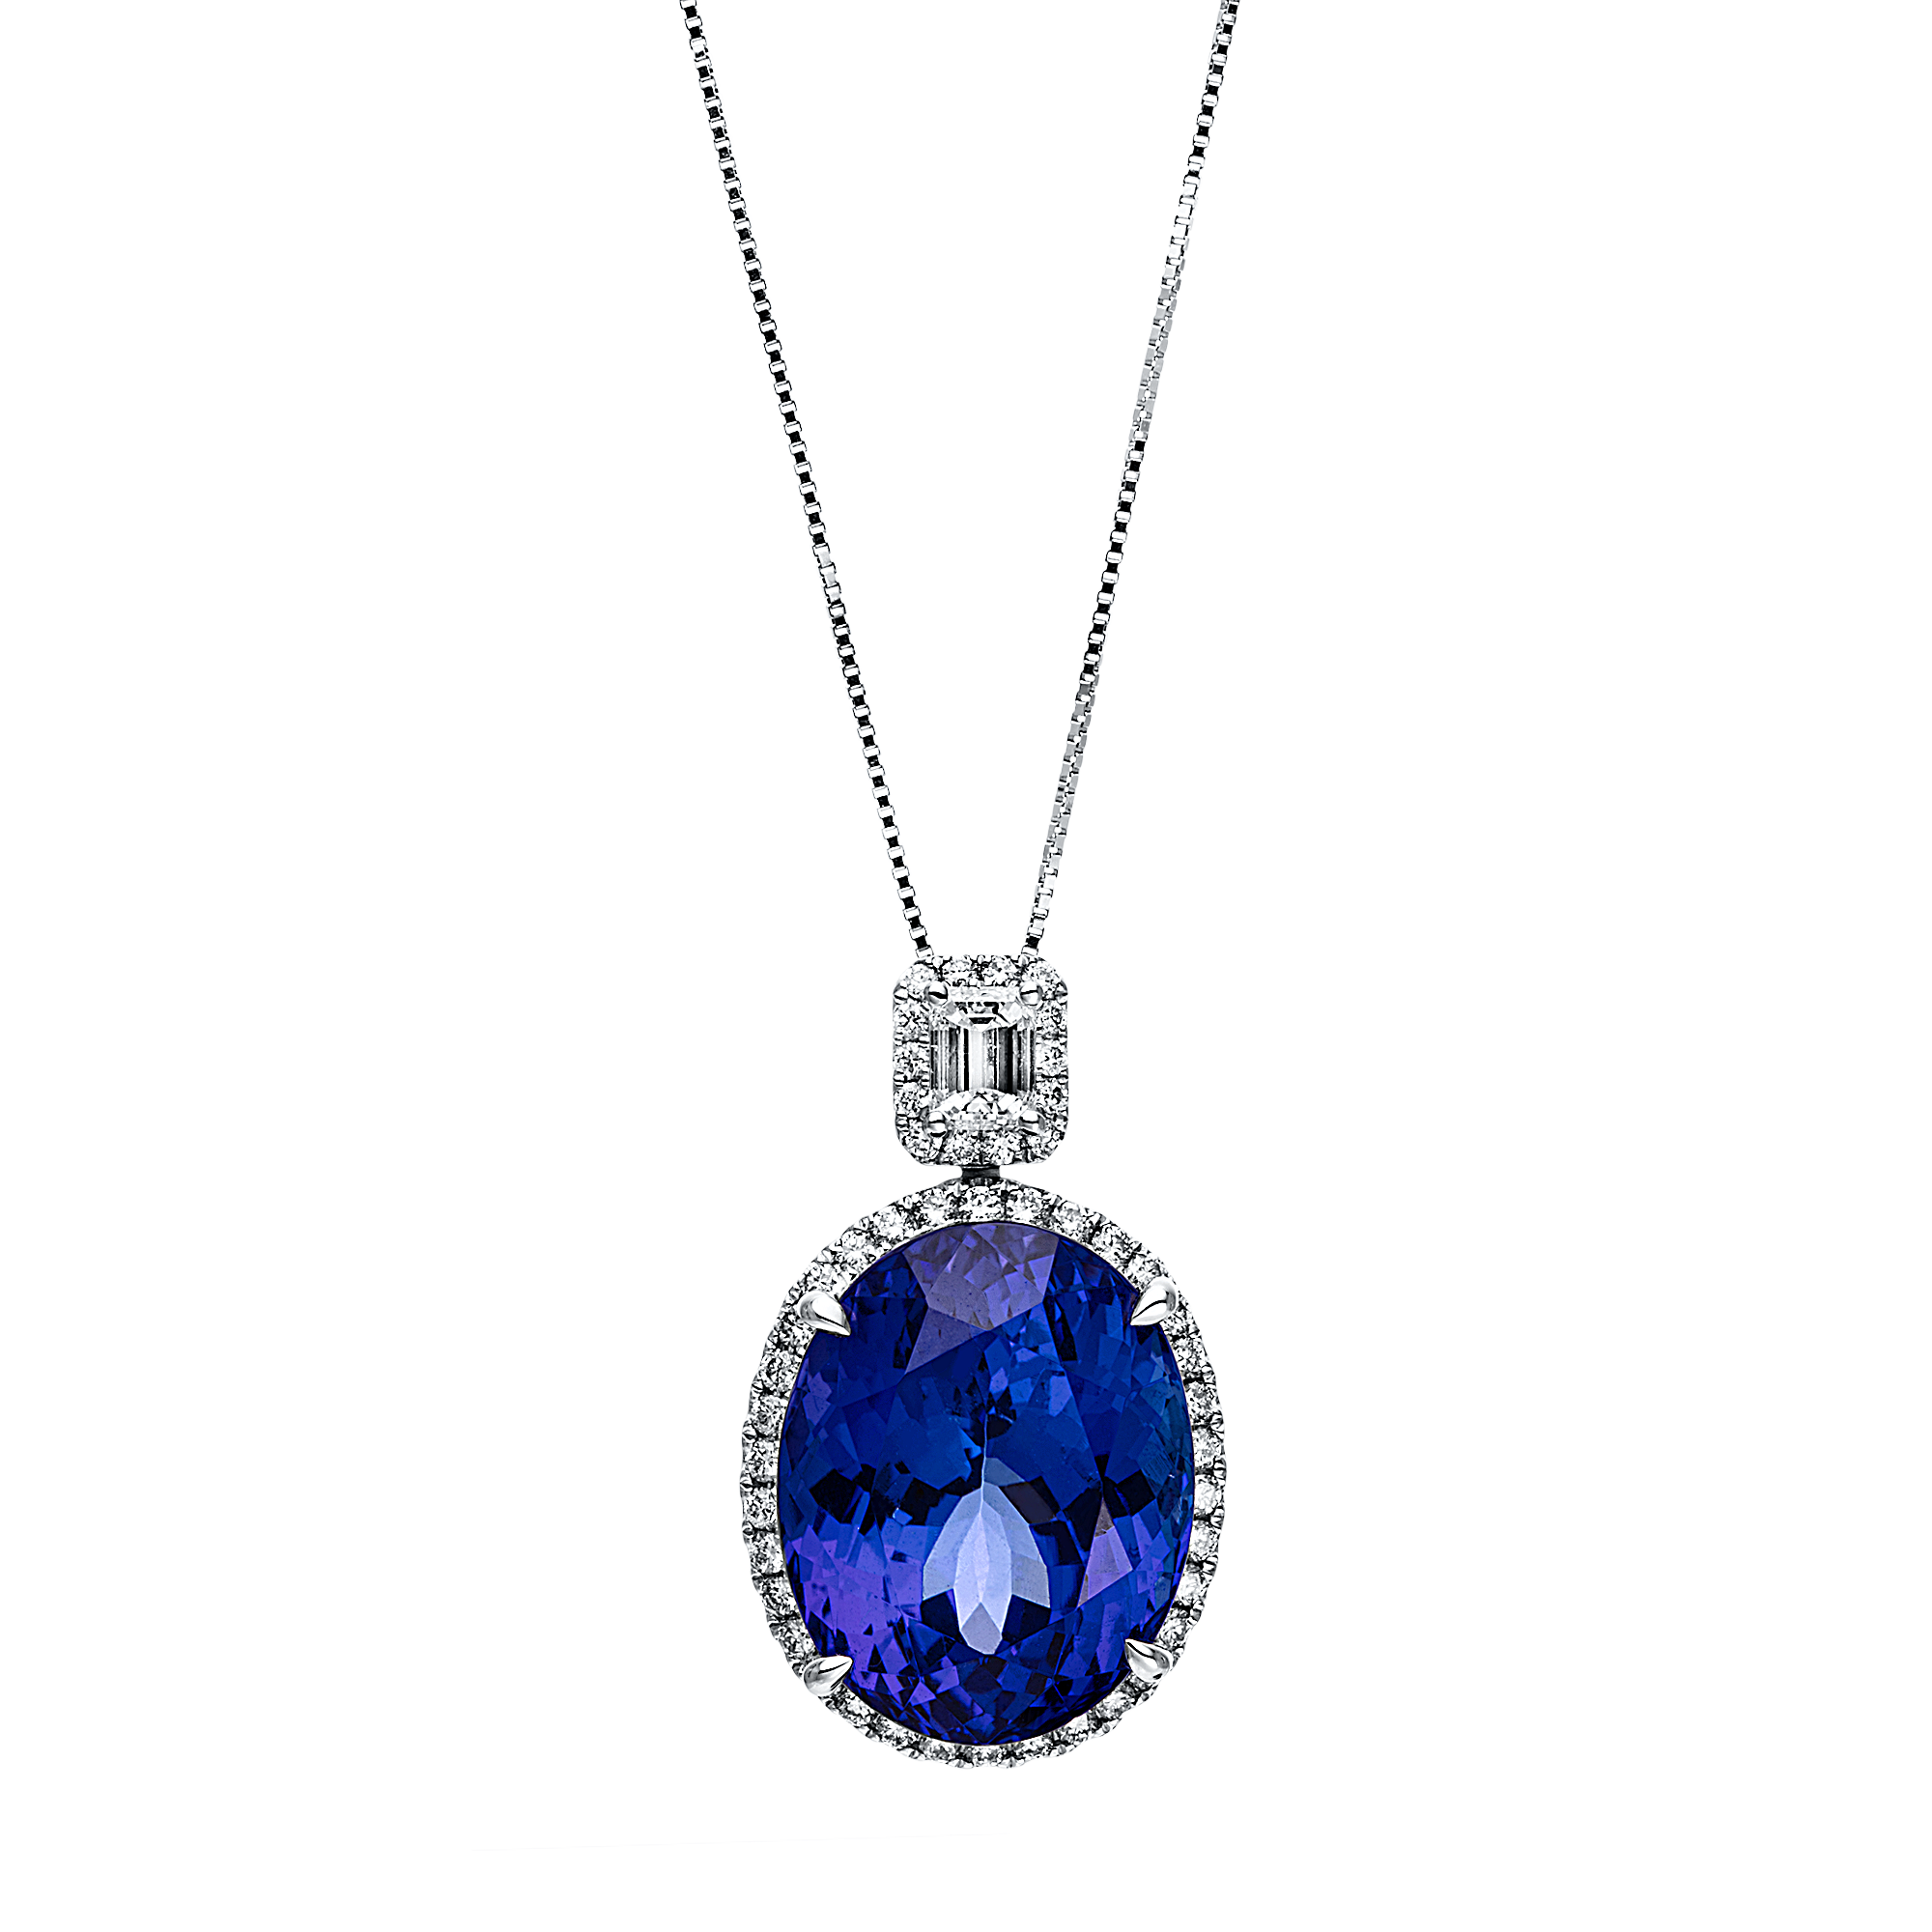 Brogle Selection Felicity Necklace with Pendant